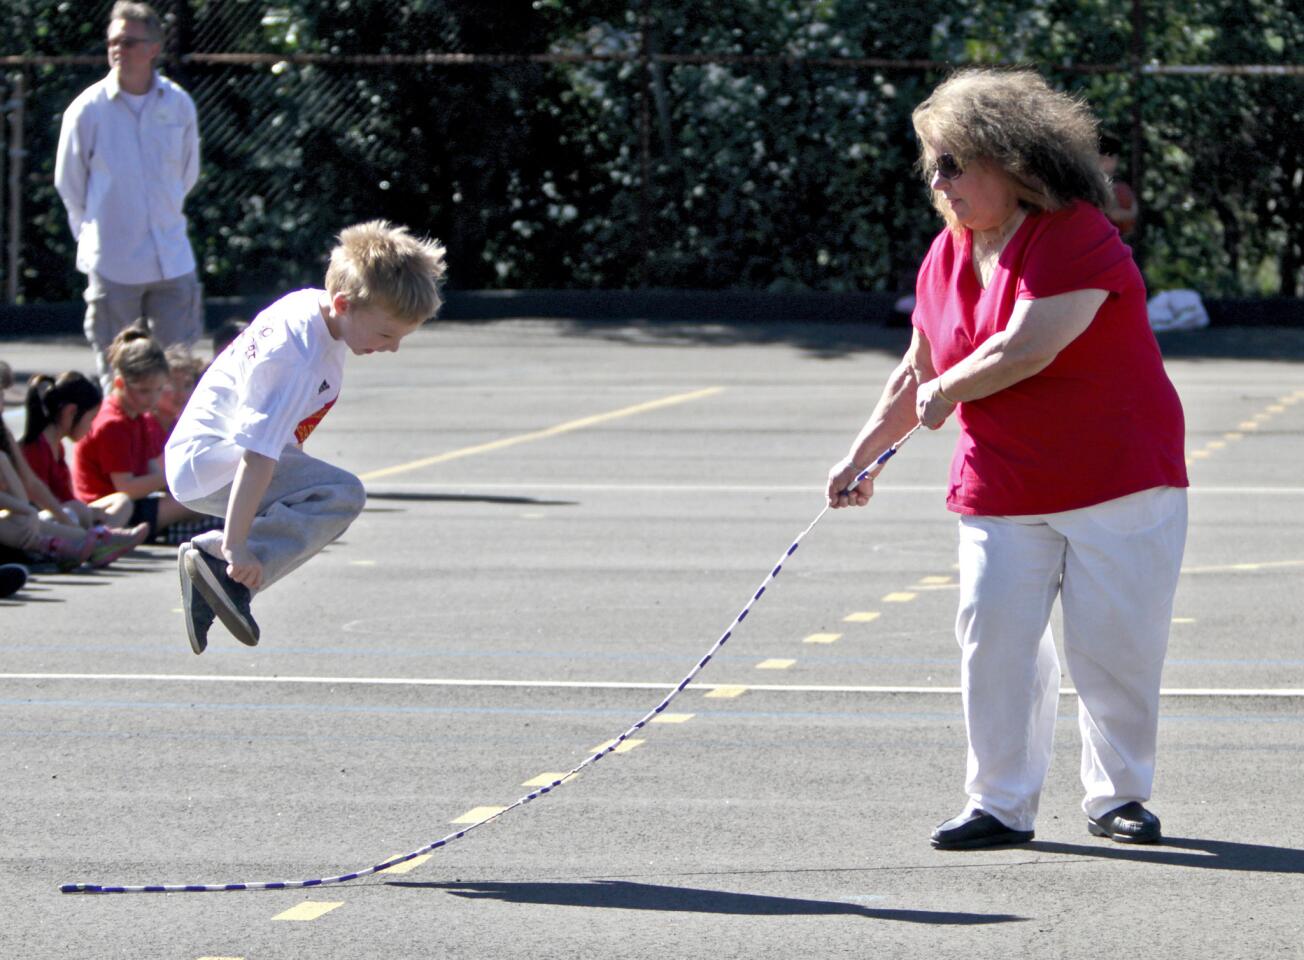 Education Assistant Sharon Padilla helps kindergartener Arthur McArdley jump rope for the Dunsmore Elementary School Jump Rope for Heart event to benefit the American Heart Assn. on Tuesday, Feb. 9, 2016. Children from all class levels at the school jumped rope for about half an hour.